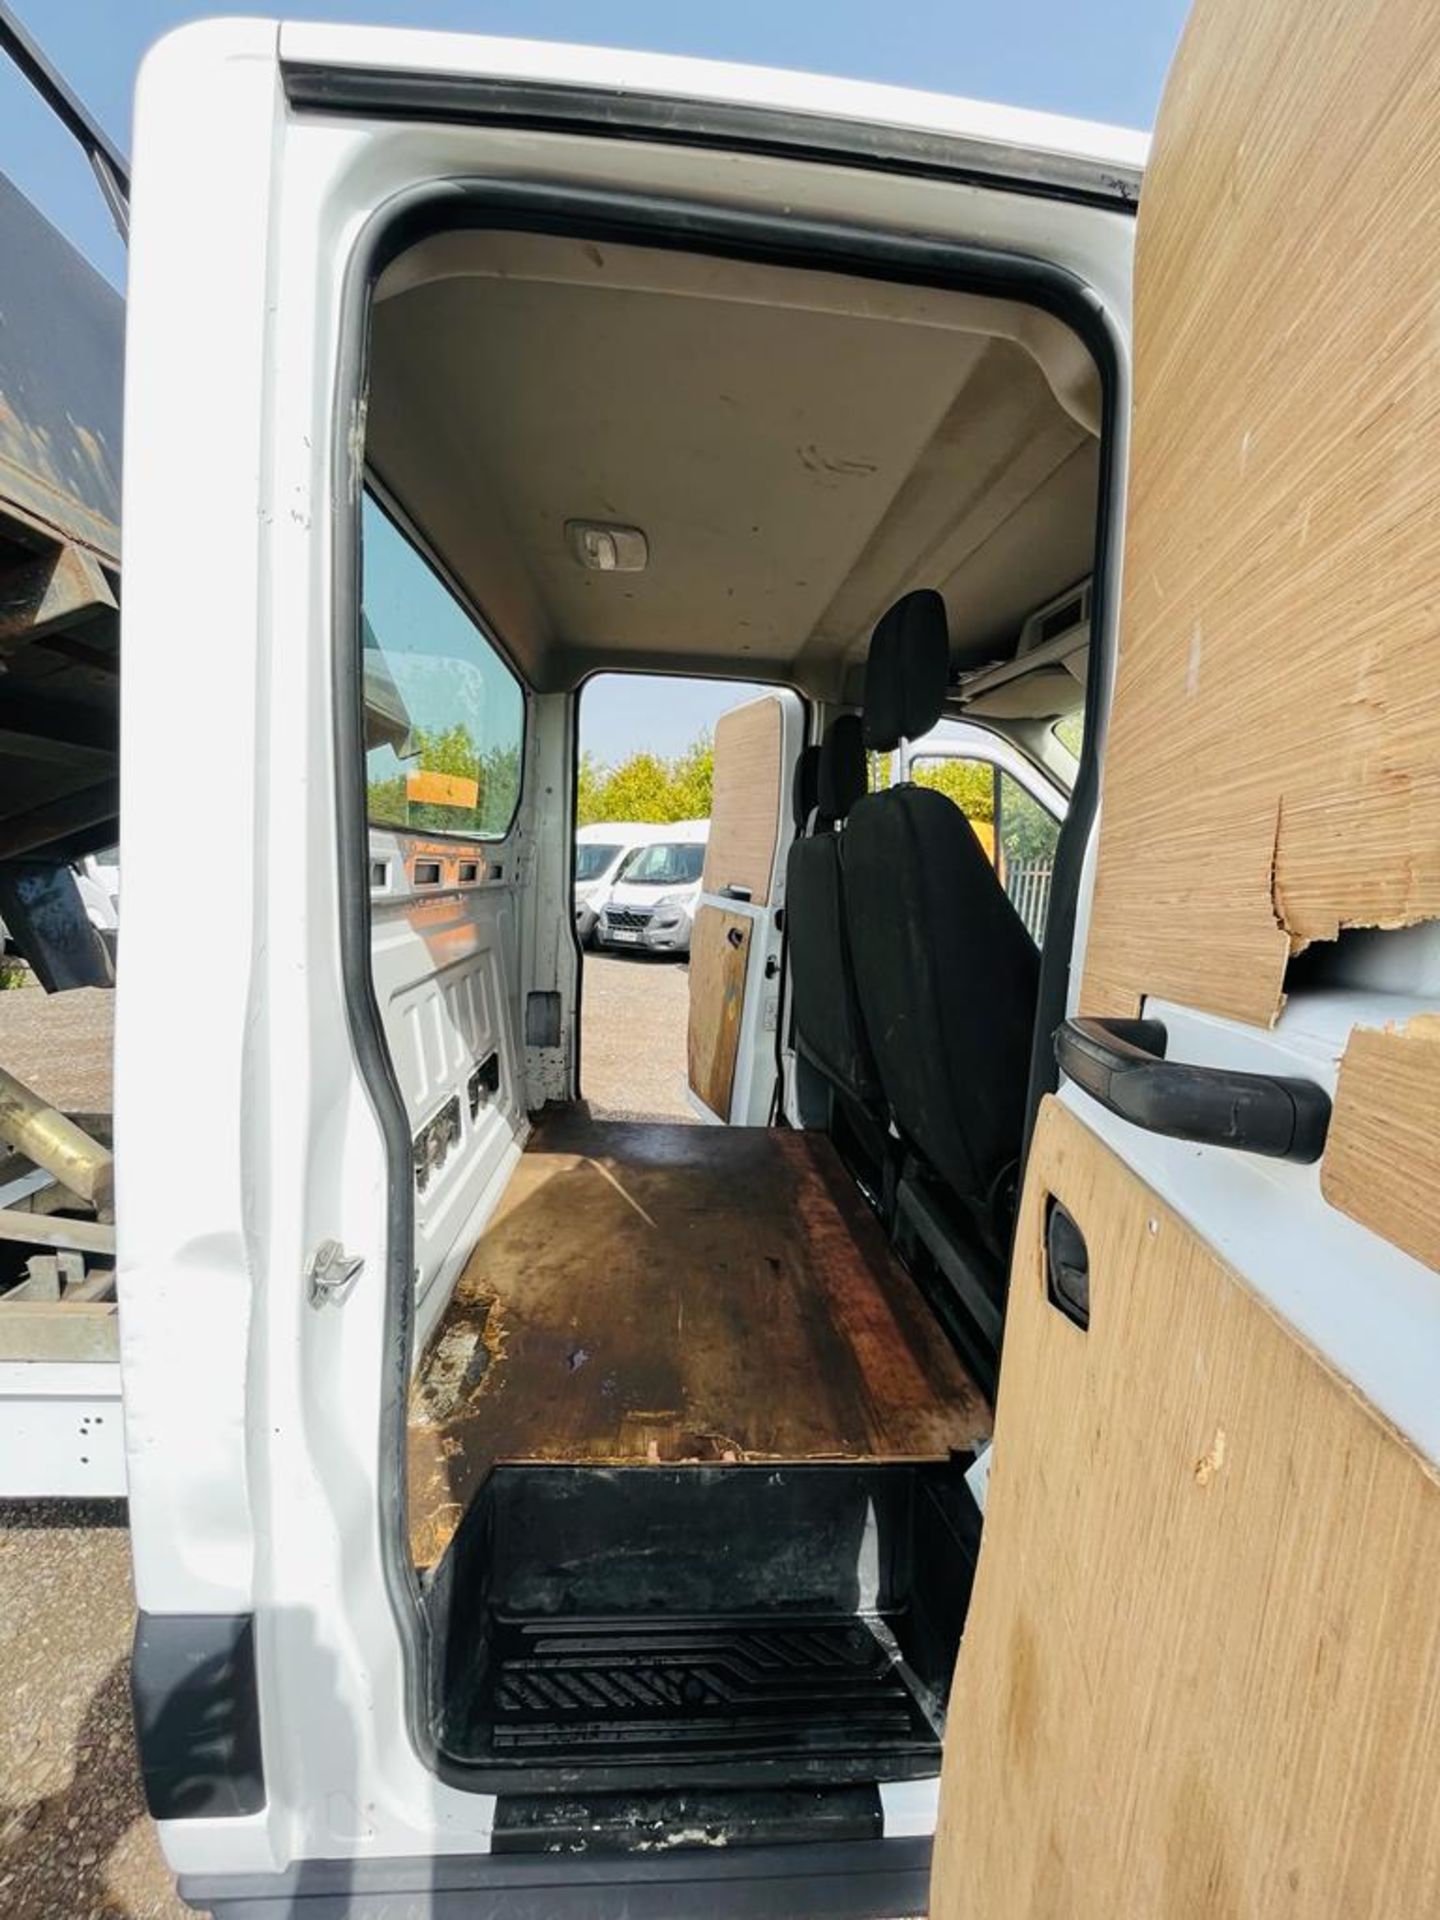 ** ON SALE **Ford Transit Chassis Cab 350 RWD 2.0 TDCI 130 2018 '68 Reg' - Tow Bar - Long Wheel Base - Image 30 of 35